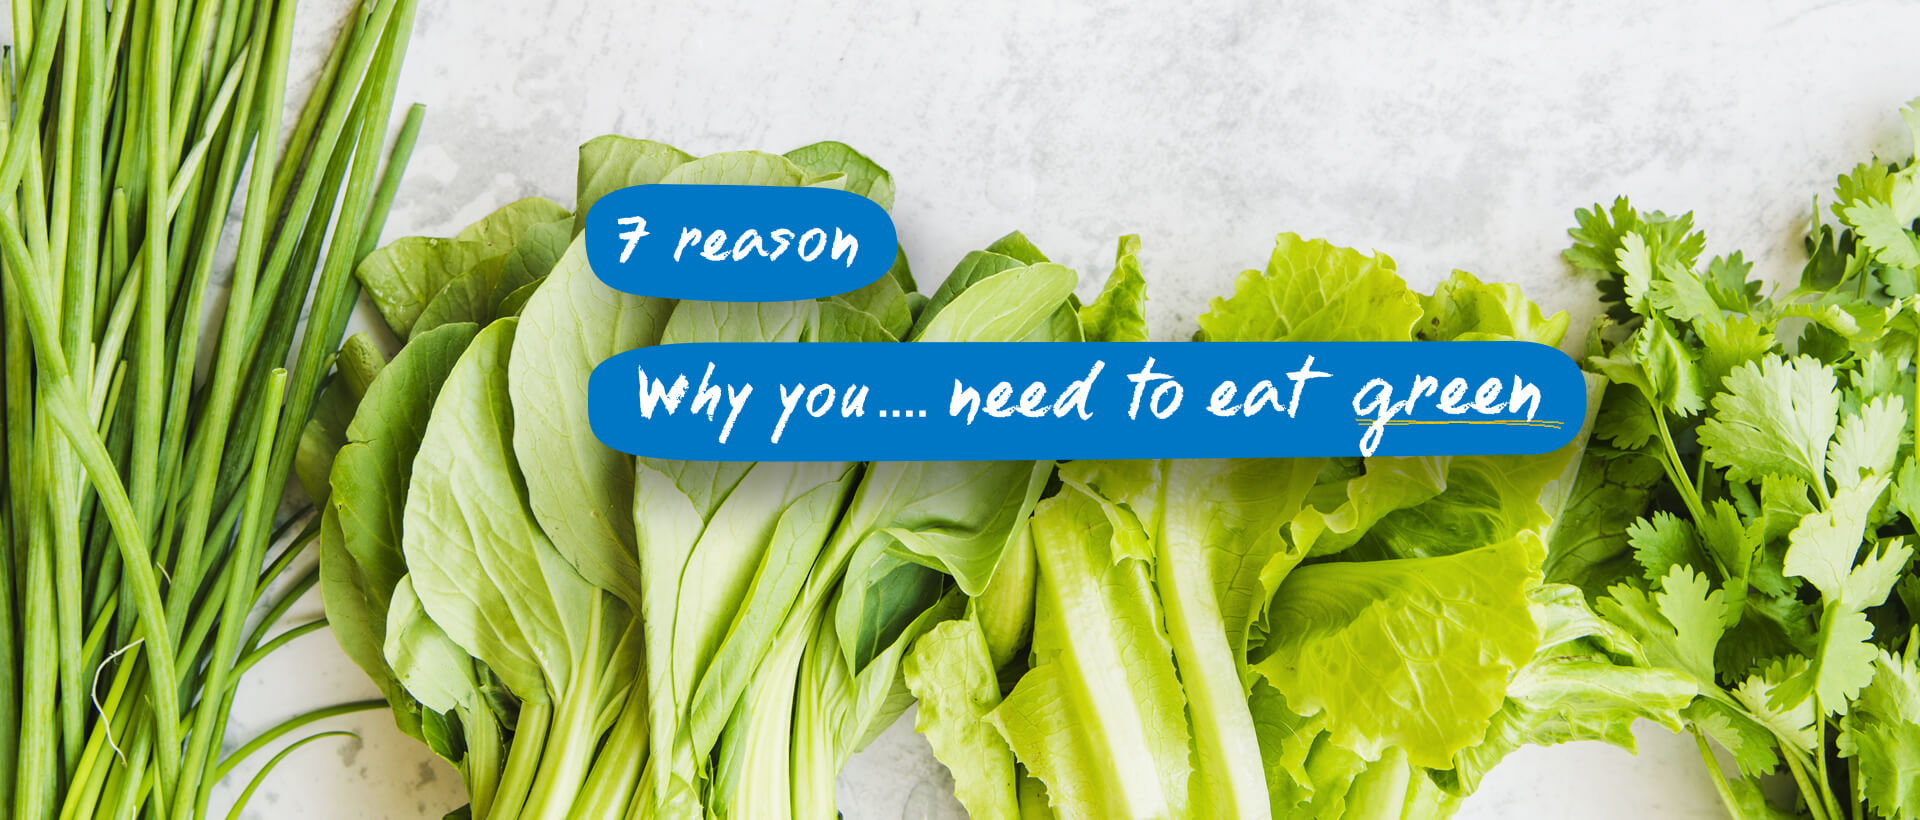 7 reasons why you need to eat your greens